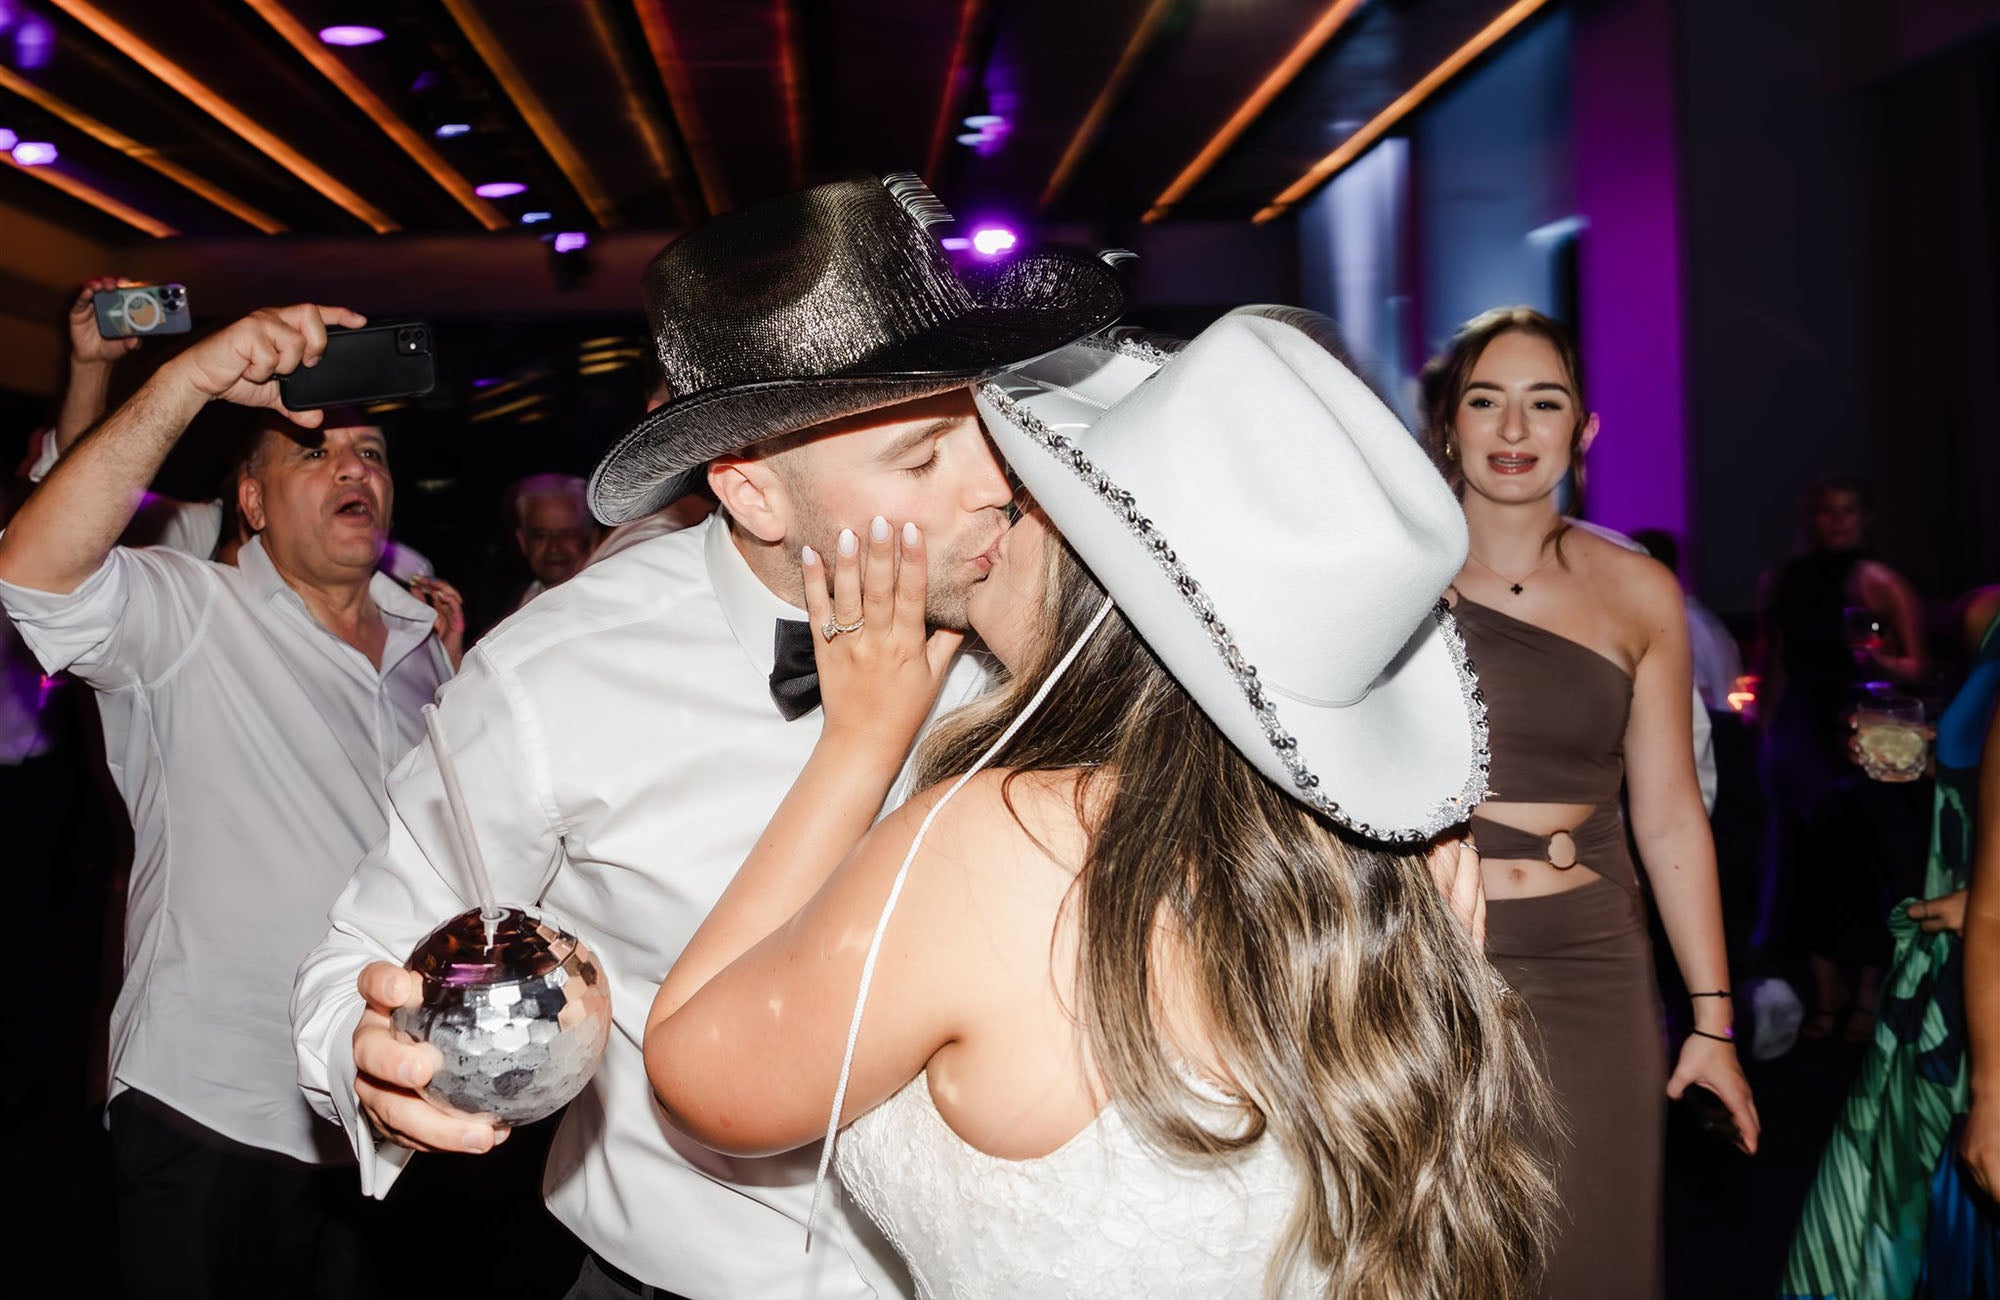 Bride and groom kissing at wedding reception party